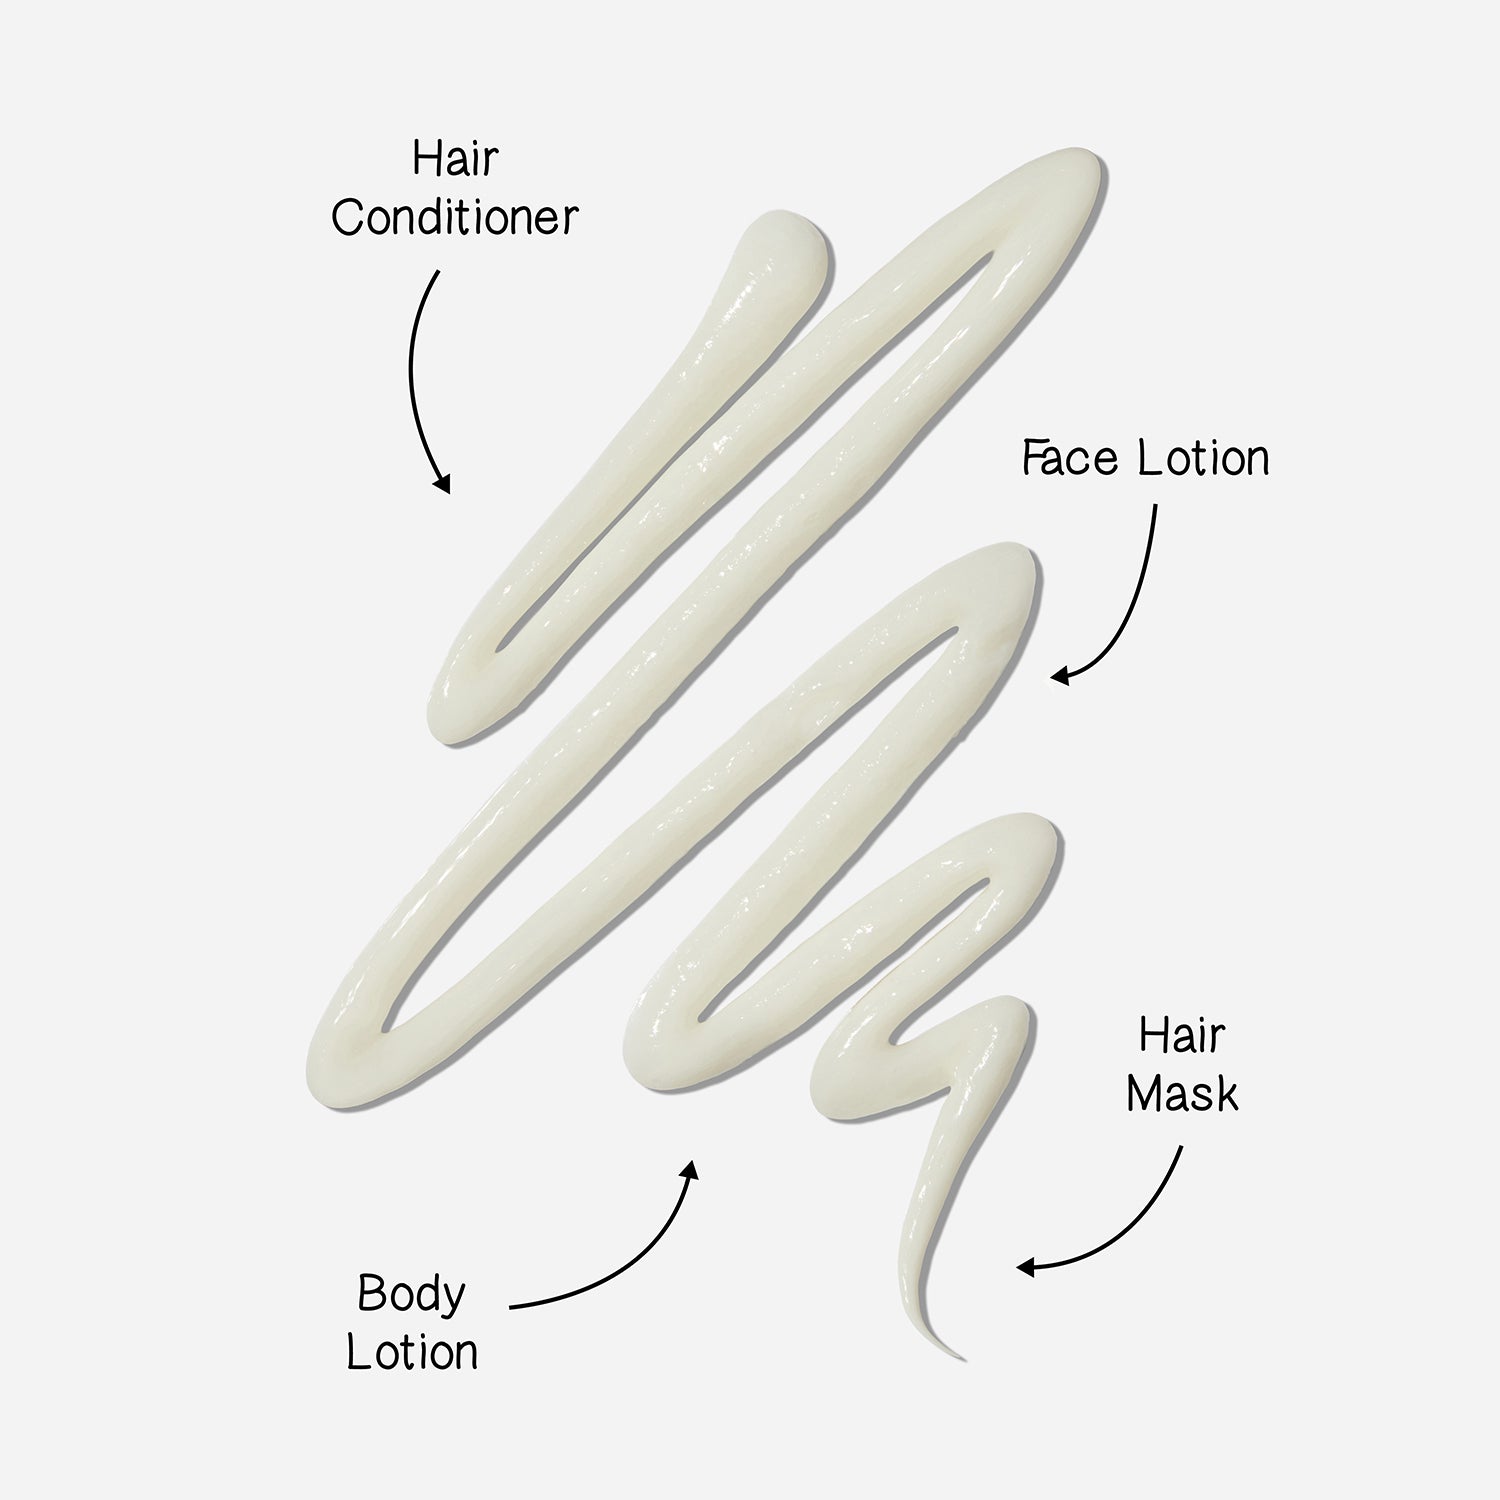 Dr.Lipp Before N'After uses - hair conditioner, face lotion, hair mask, body lotion